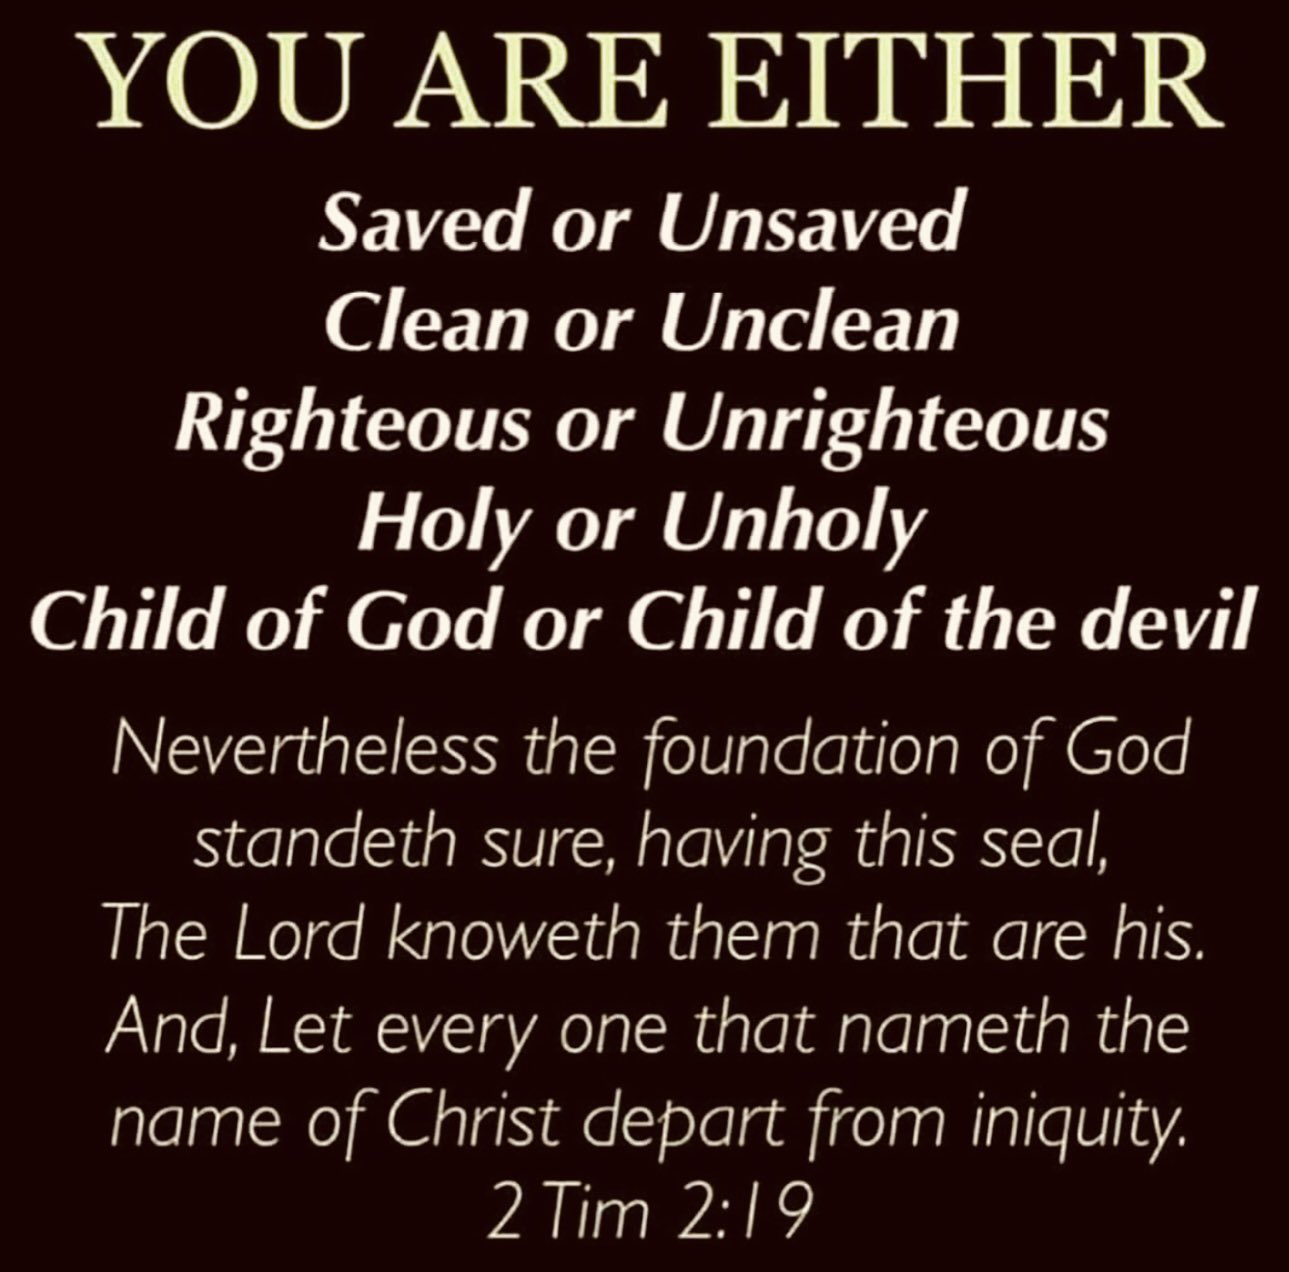 YOU ARE EITHER Saved or Unsaved Clean or Unclean Righteous or Unrighteous Holy or Unholy Child of God or Child of the devil Nevertheless the foundation of God standeth sure; this seal; The Lord knoweth them that are his: And; Let every one that nameth the name of Christ depart from iniquity: 2 Tim 2.19 having